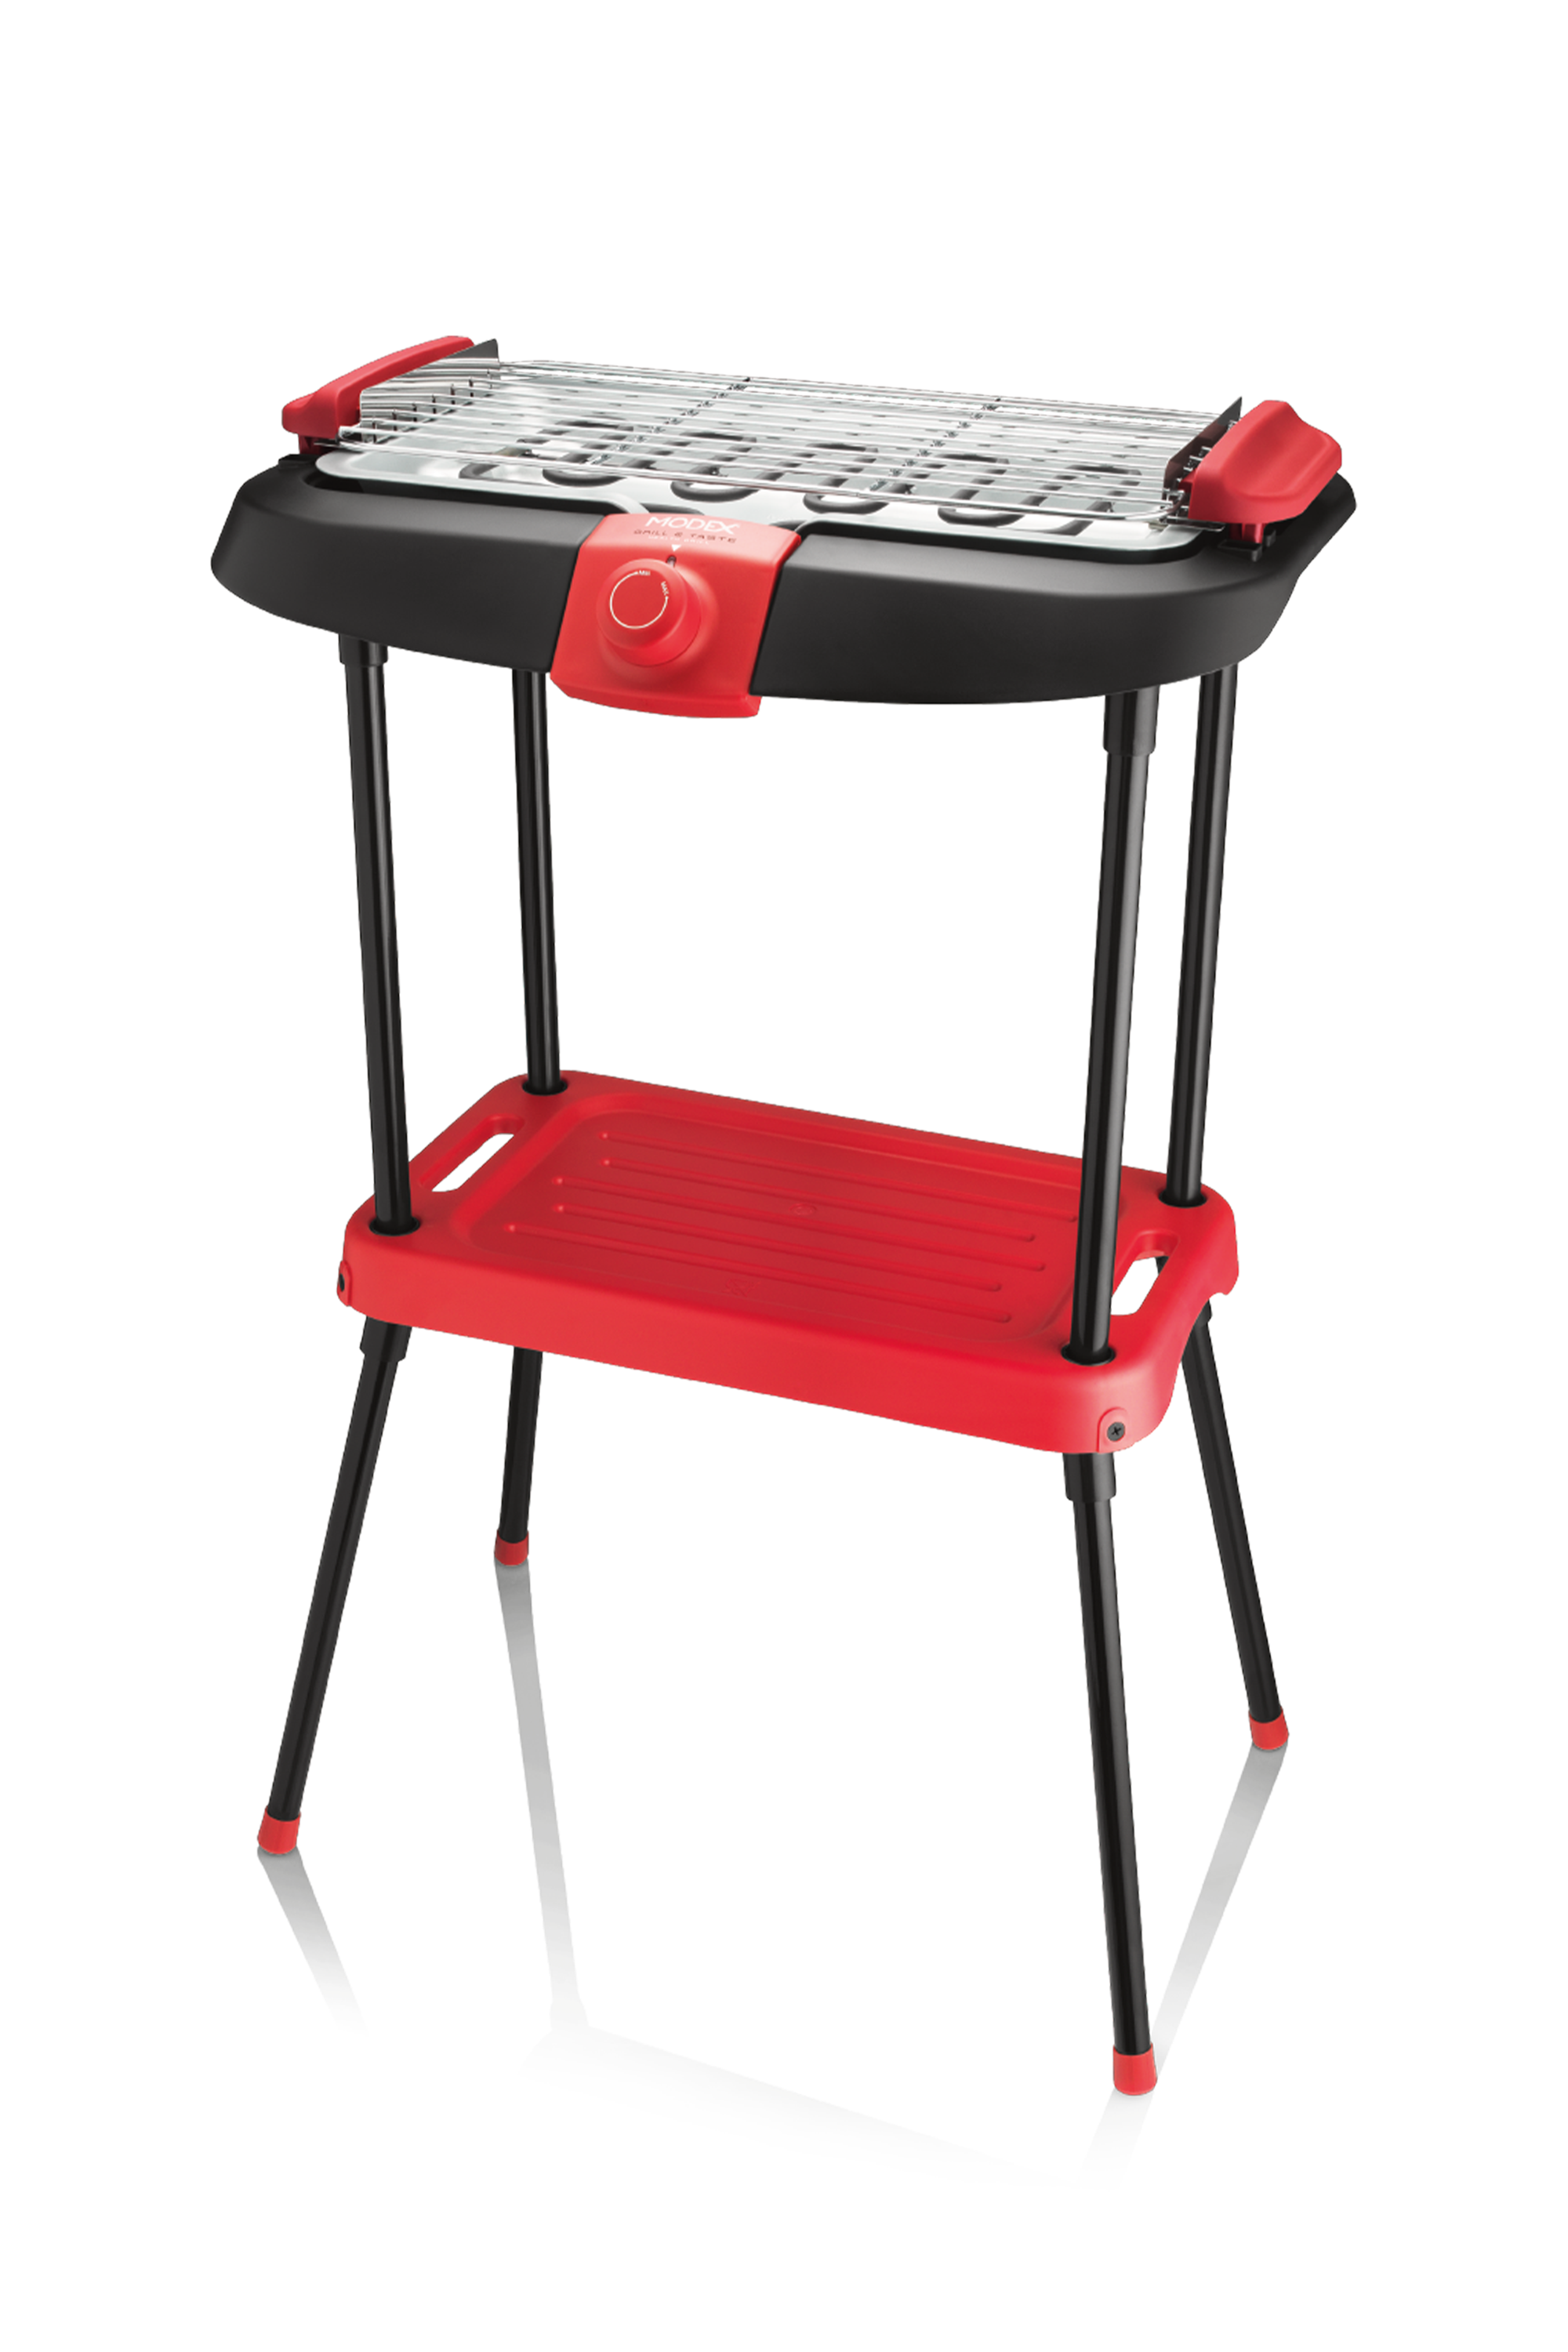 Hg899 Health Grill With Stand